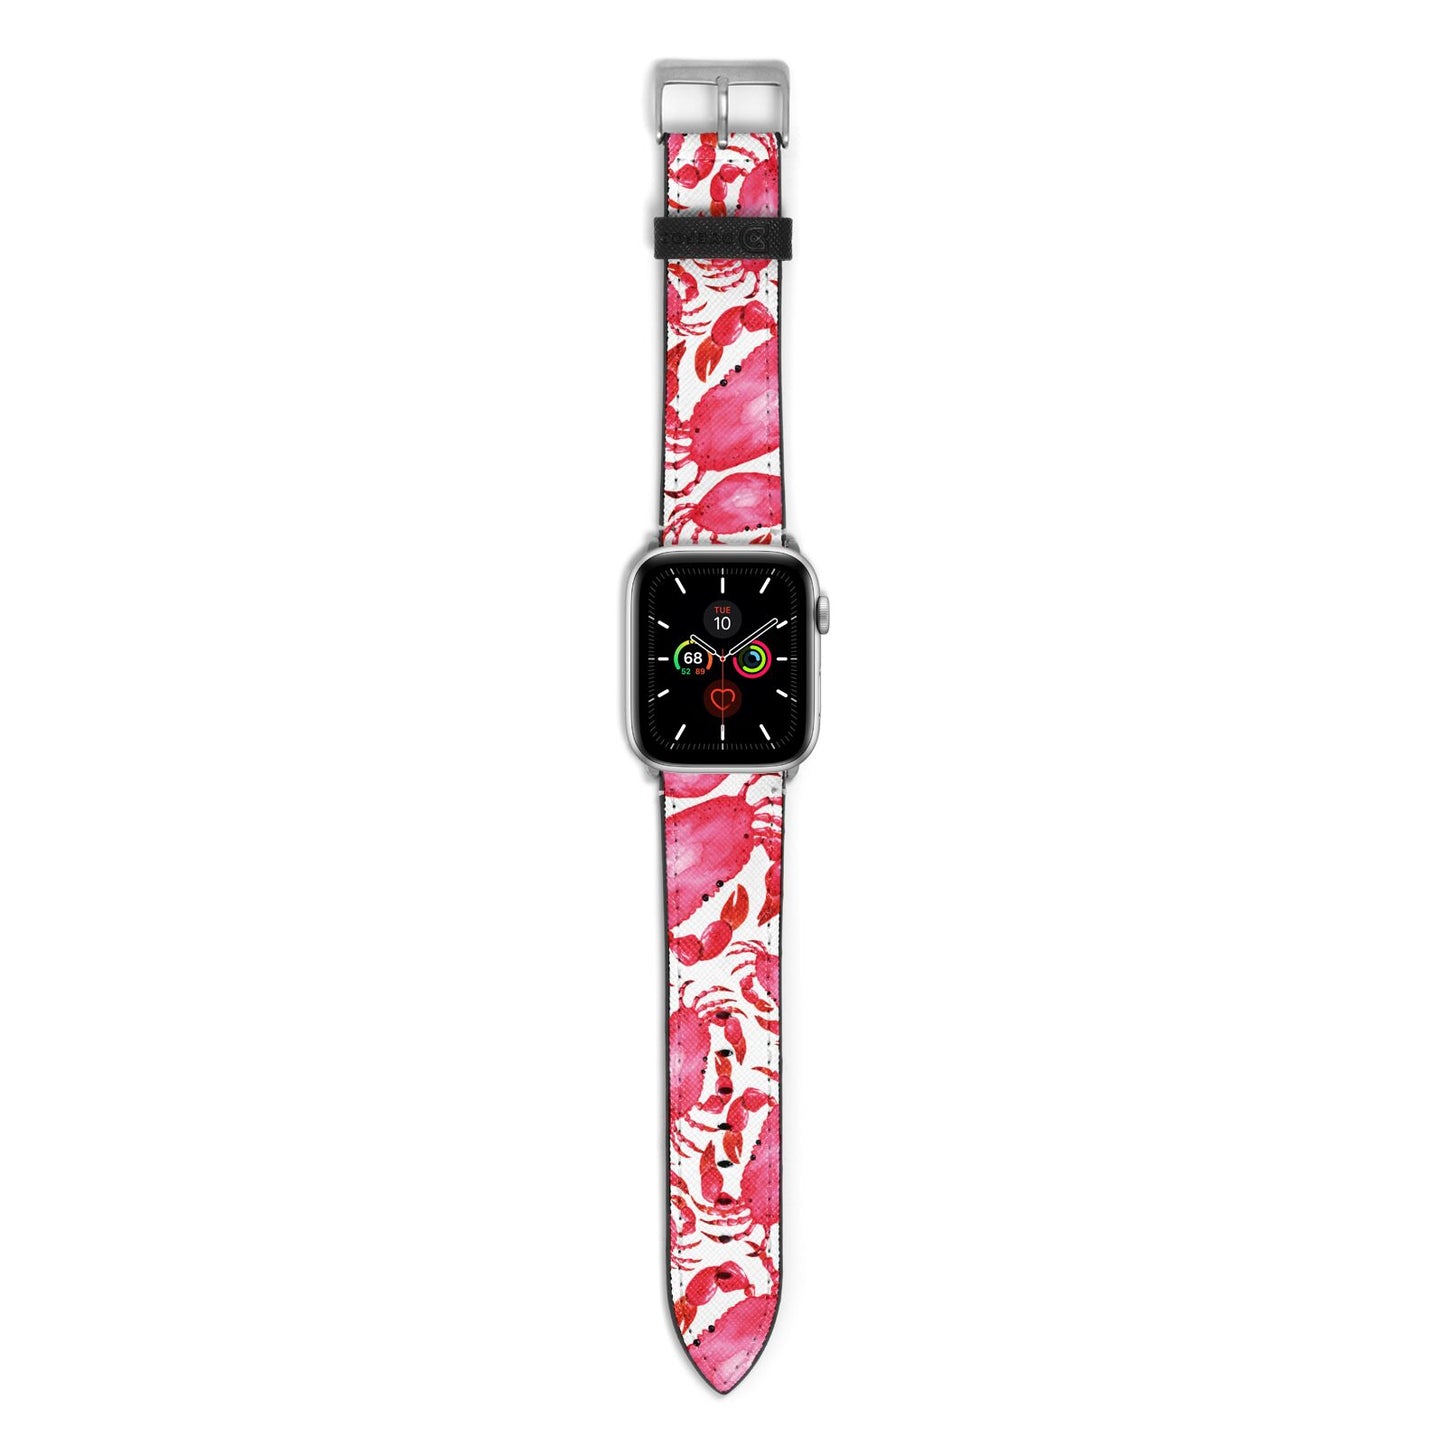 Crab Apple Watch Strap with Silver Hardware